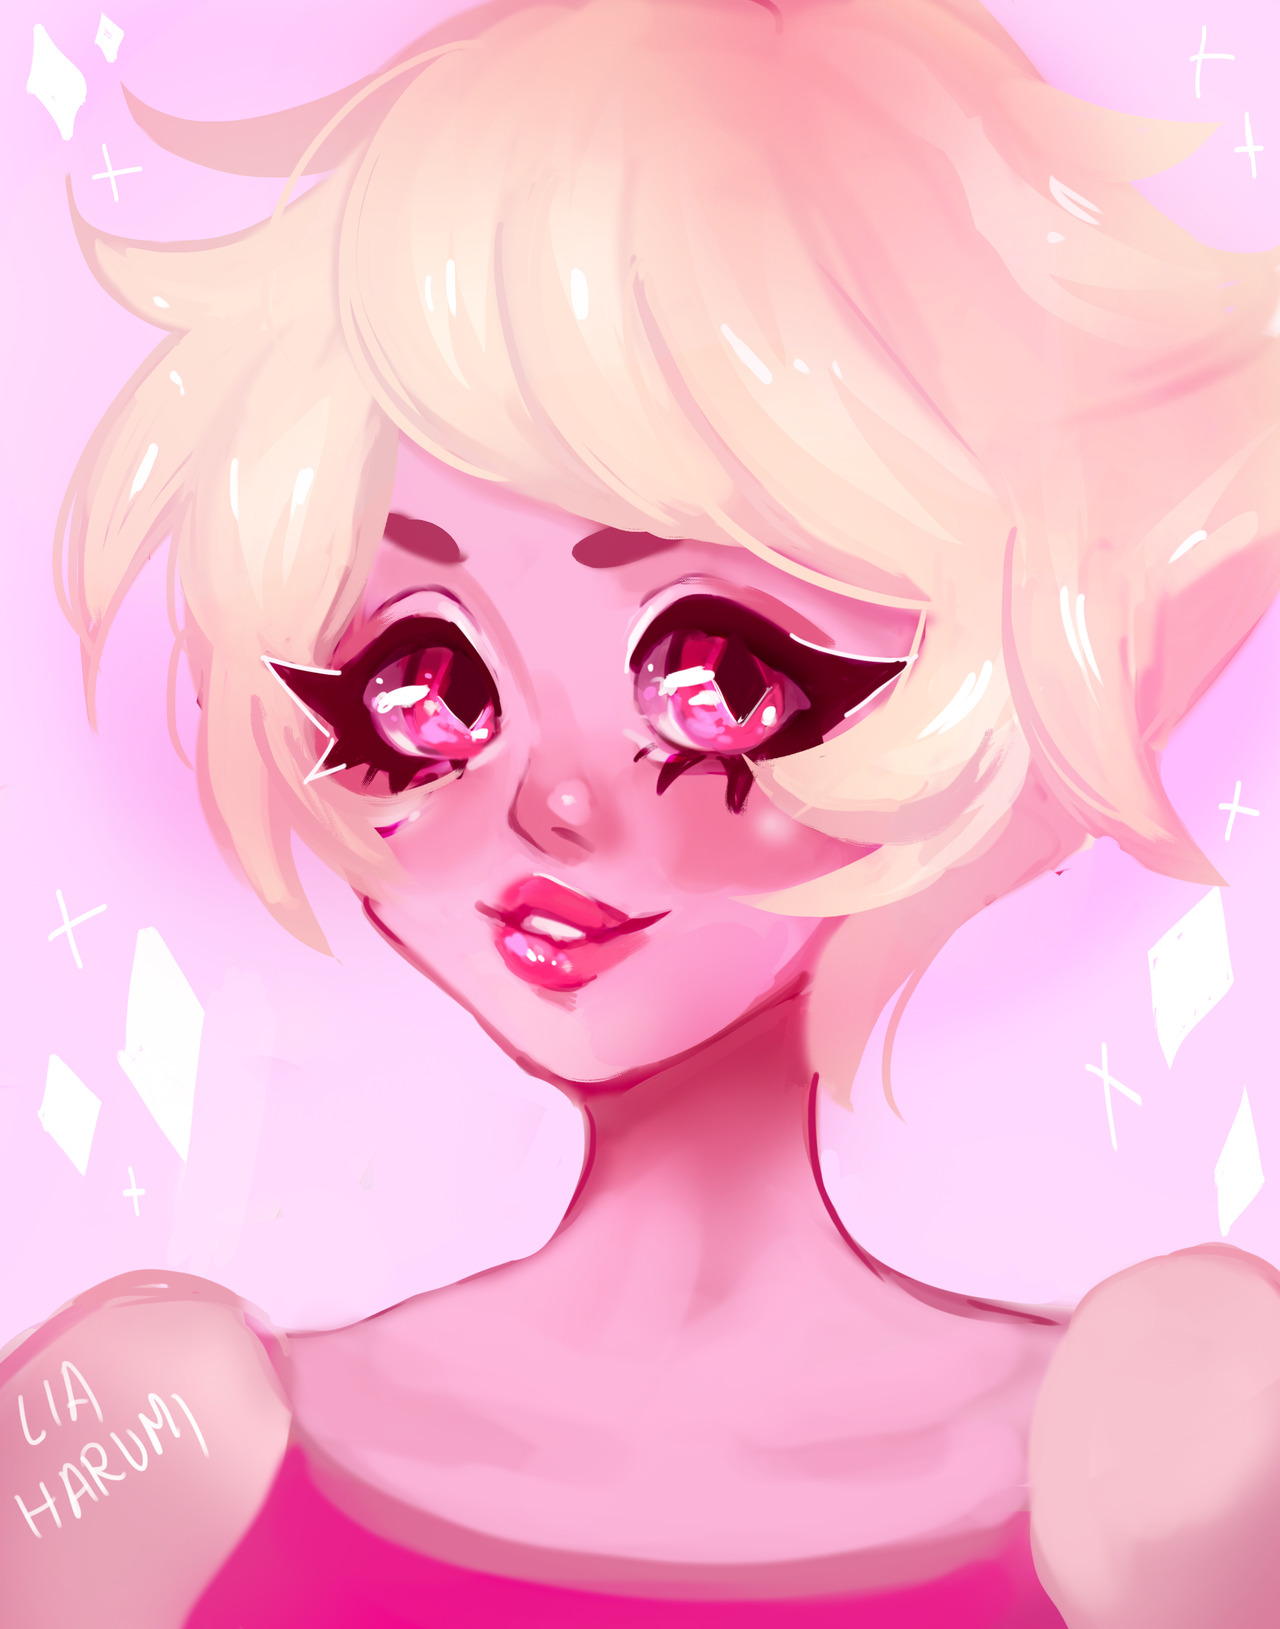 PINK DIAMOND + speed paint ( this is my first speed paint video, hope you guys like it )